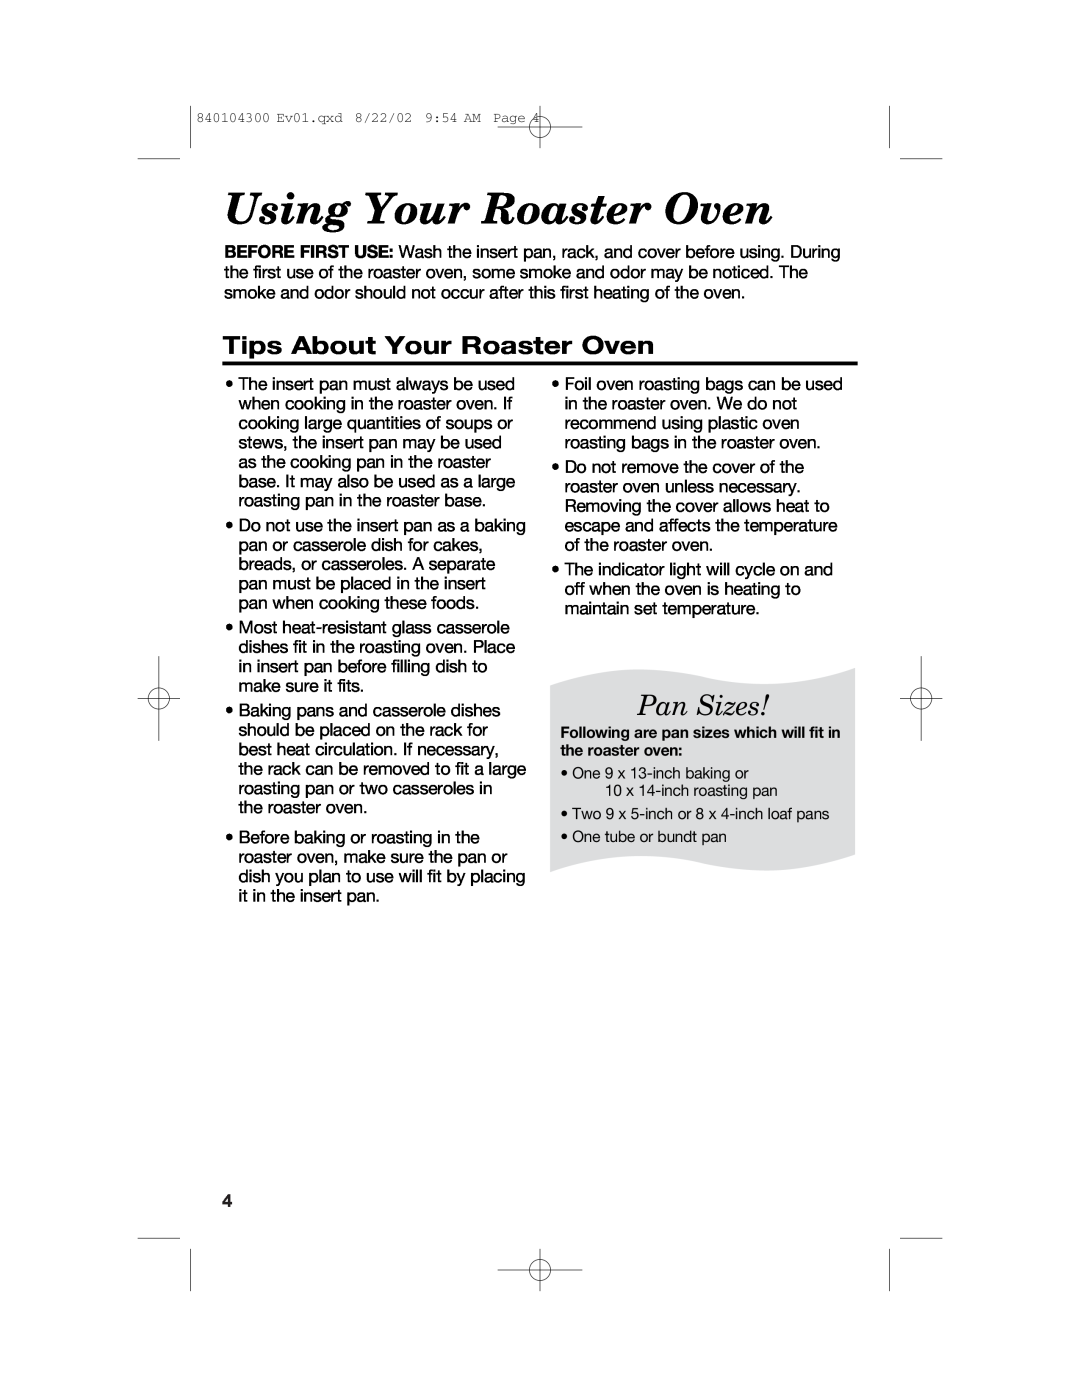 Hamilton Beach 32180C manual Using Your Roaster Oven, Pan Sizes, Tips About Your Roaster Oven 